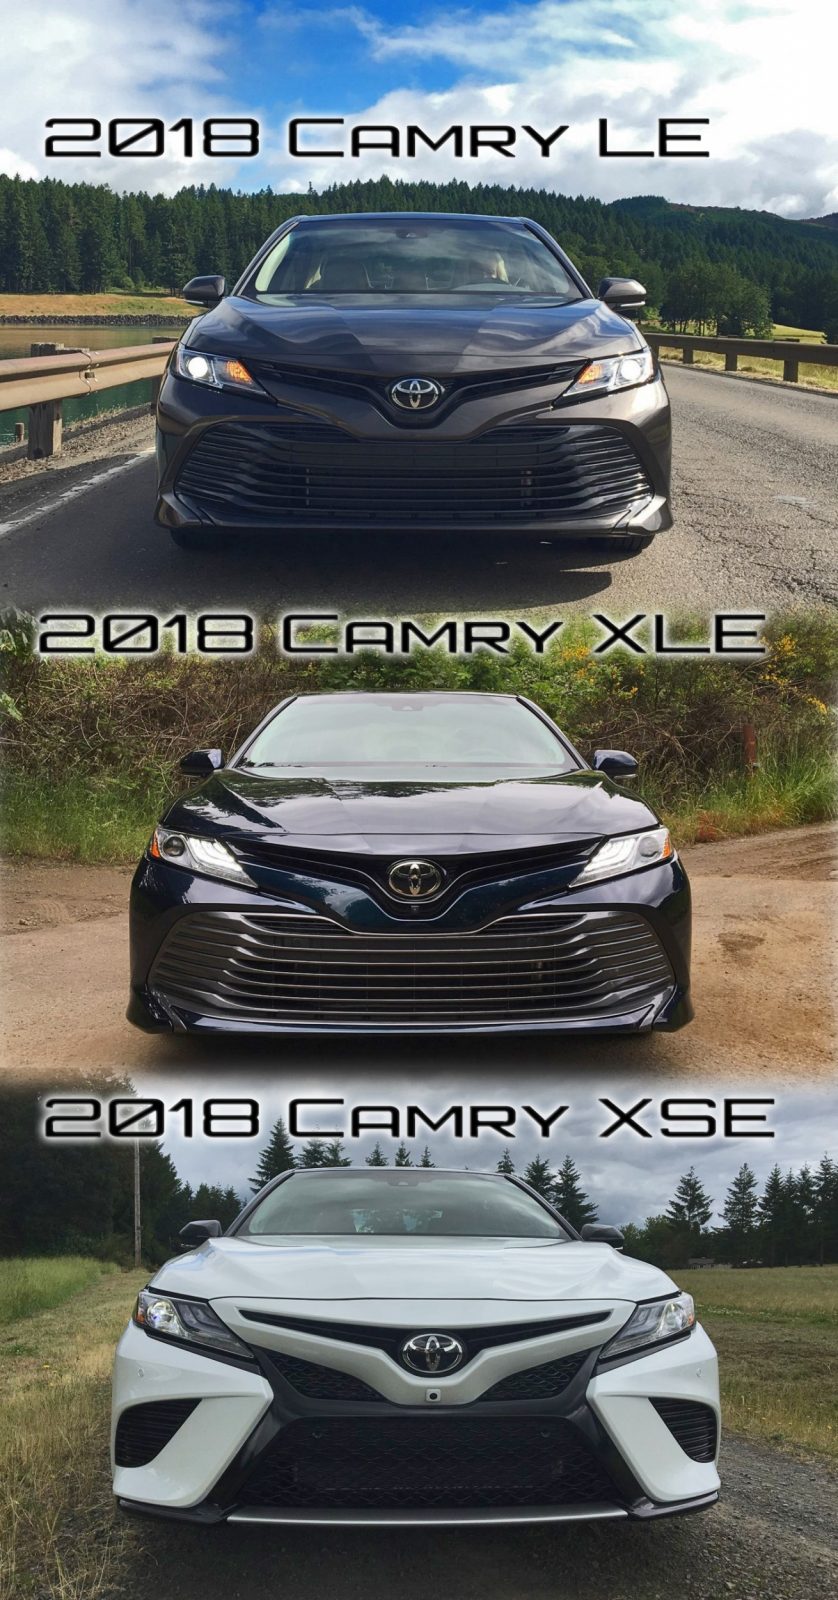 2018 Toyota CAMRY First Drives of LE, XLE and XSE By Zeid Nasser